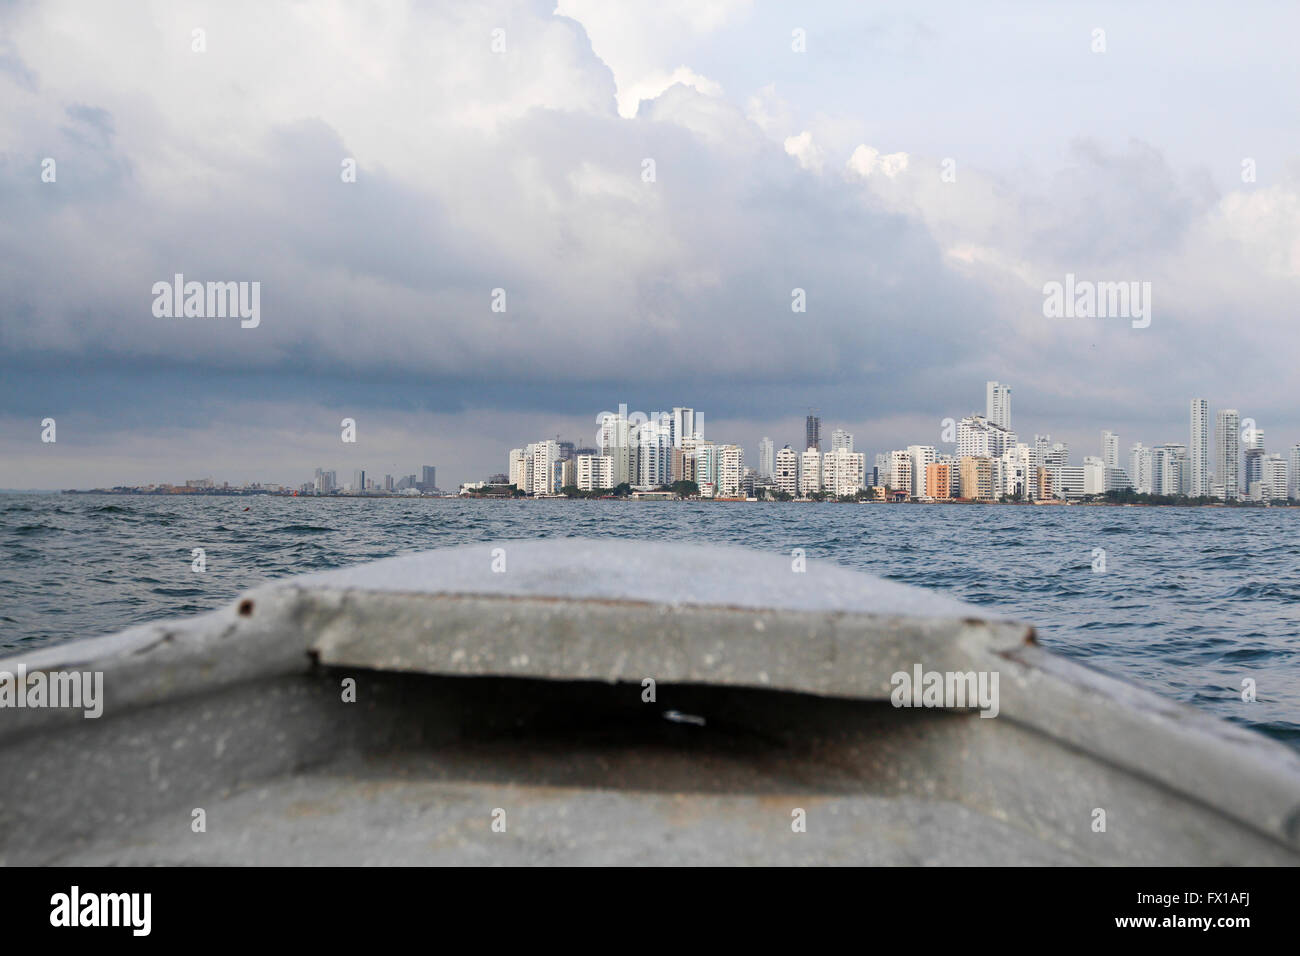 Cartagena, Colombia skyline as seen from the sea Stock Photo